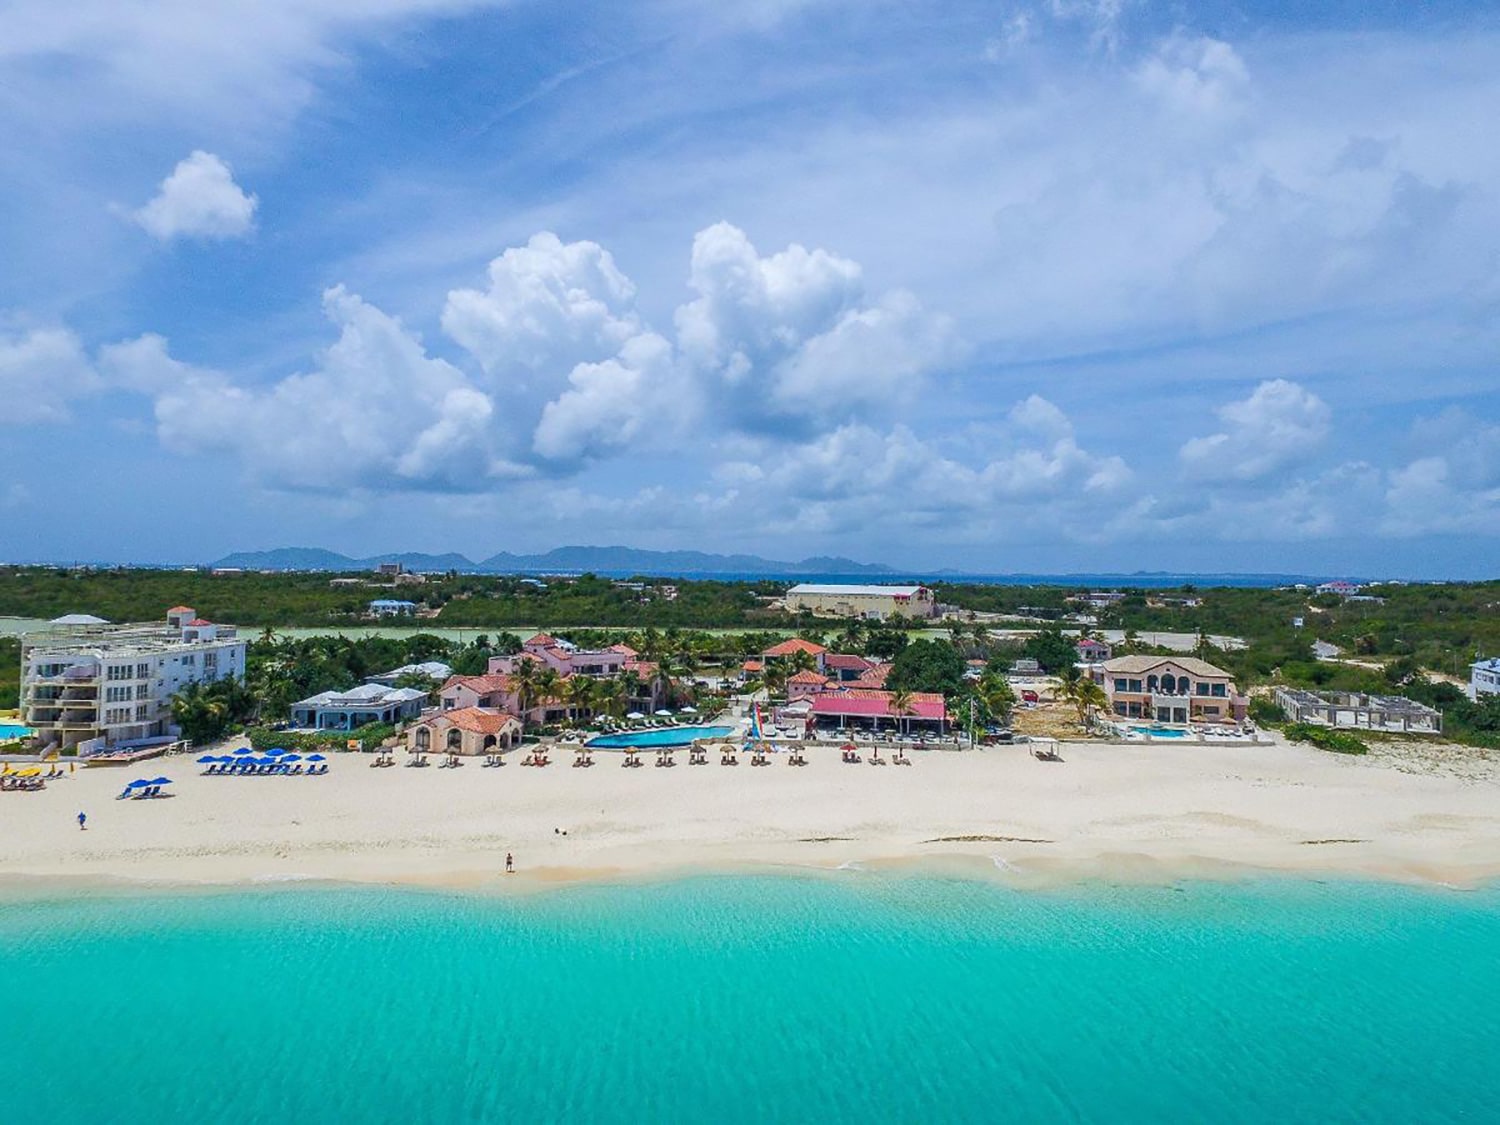 An exterior view of the property and beach at Frangipani Beach Resort in Anguilla.